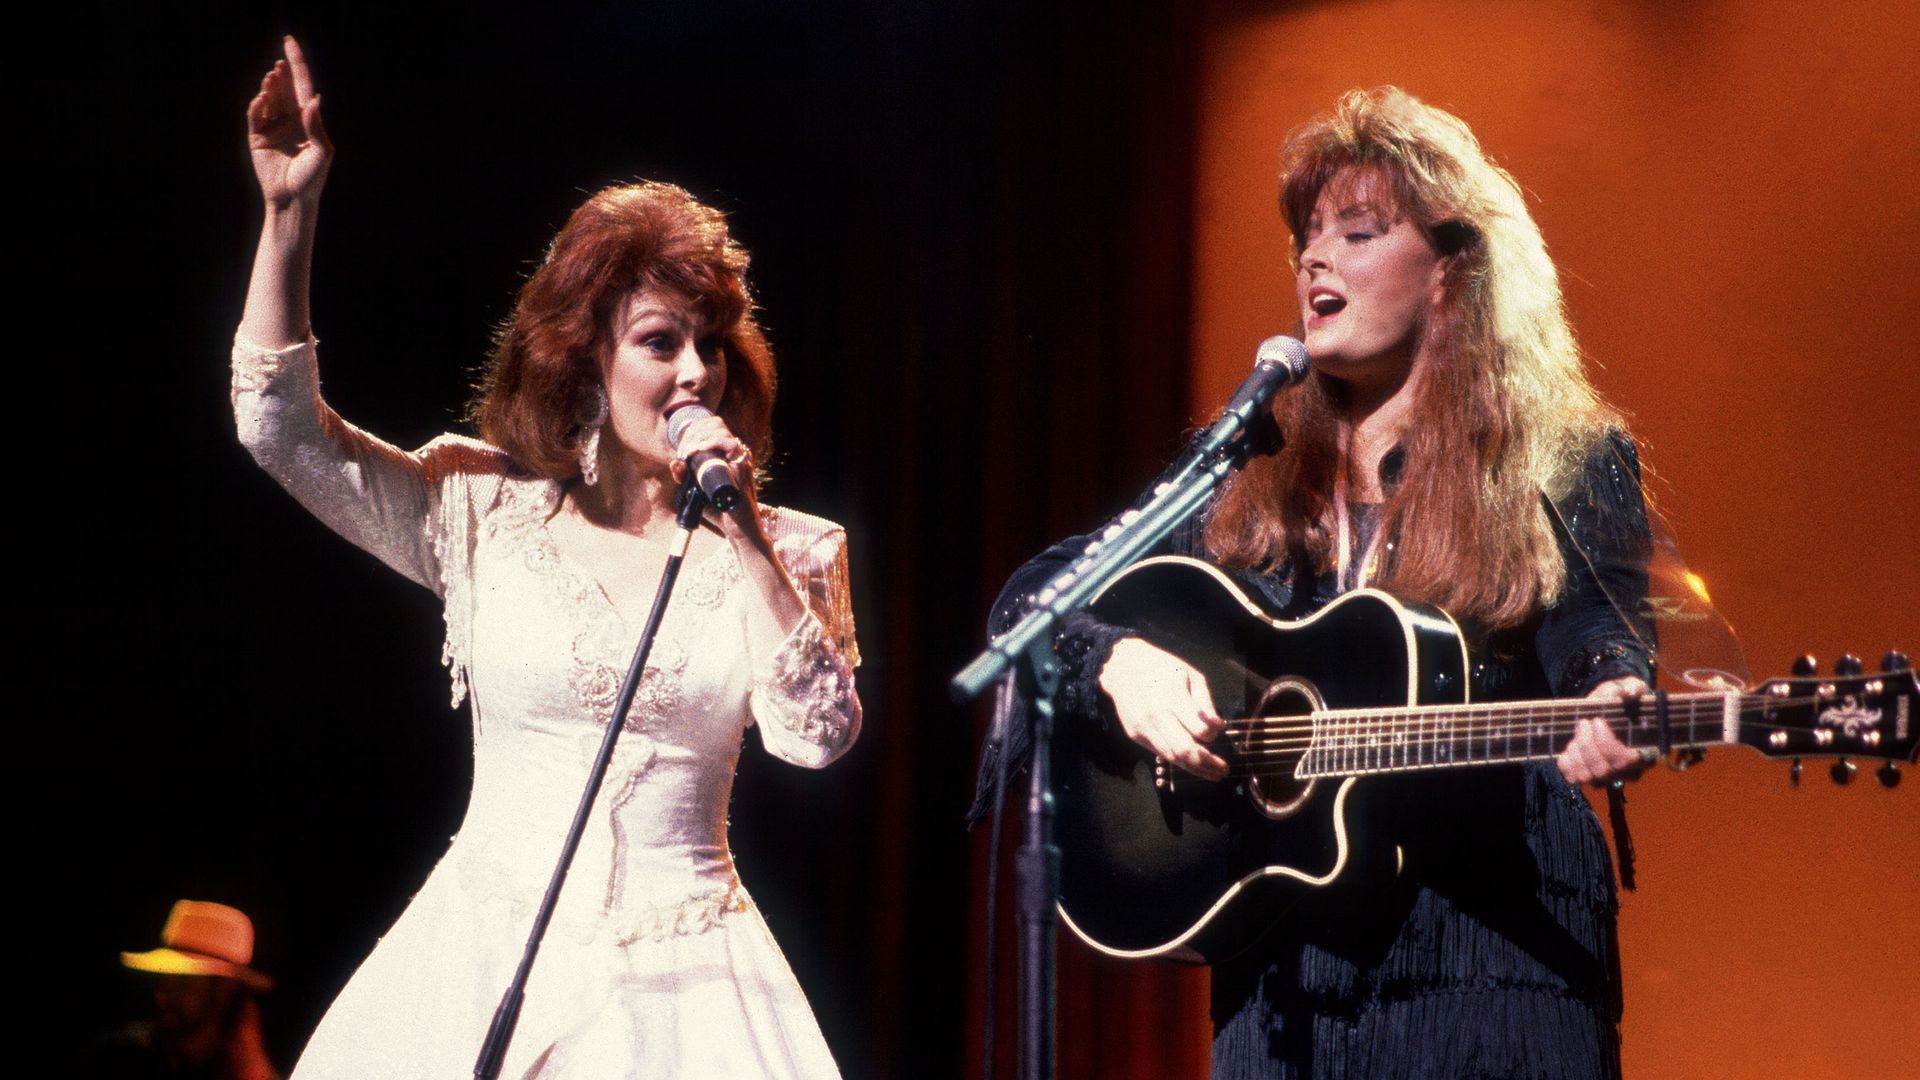 Naomi and Wynnona Judd, with Naomi on the microphone in a white dress and Wynnona holding a black guitar